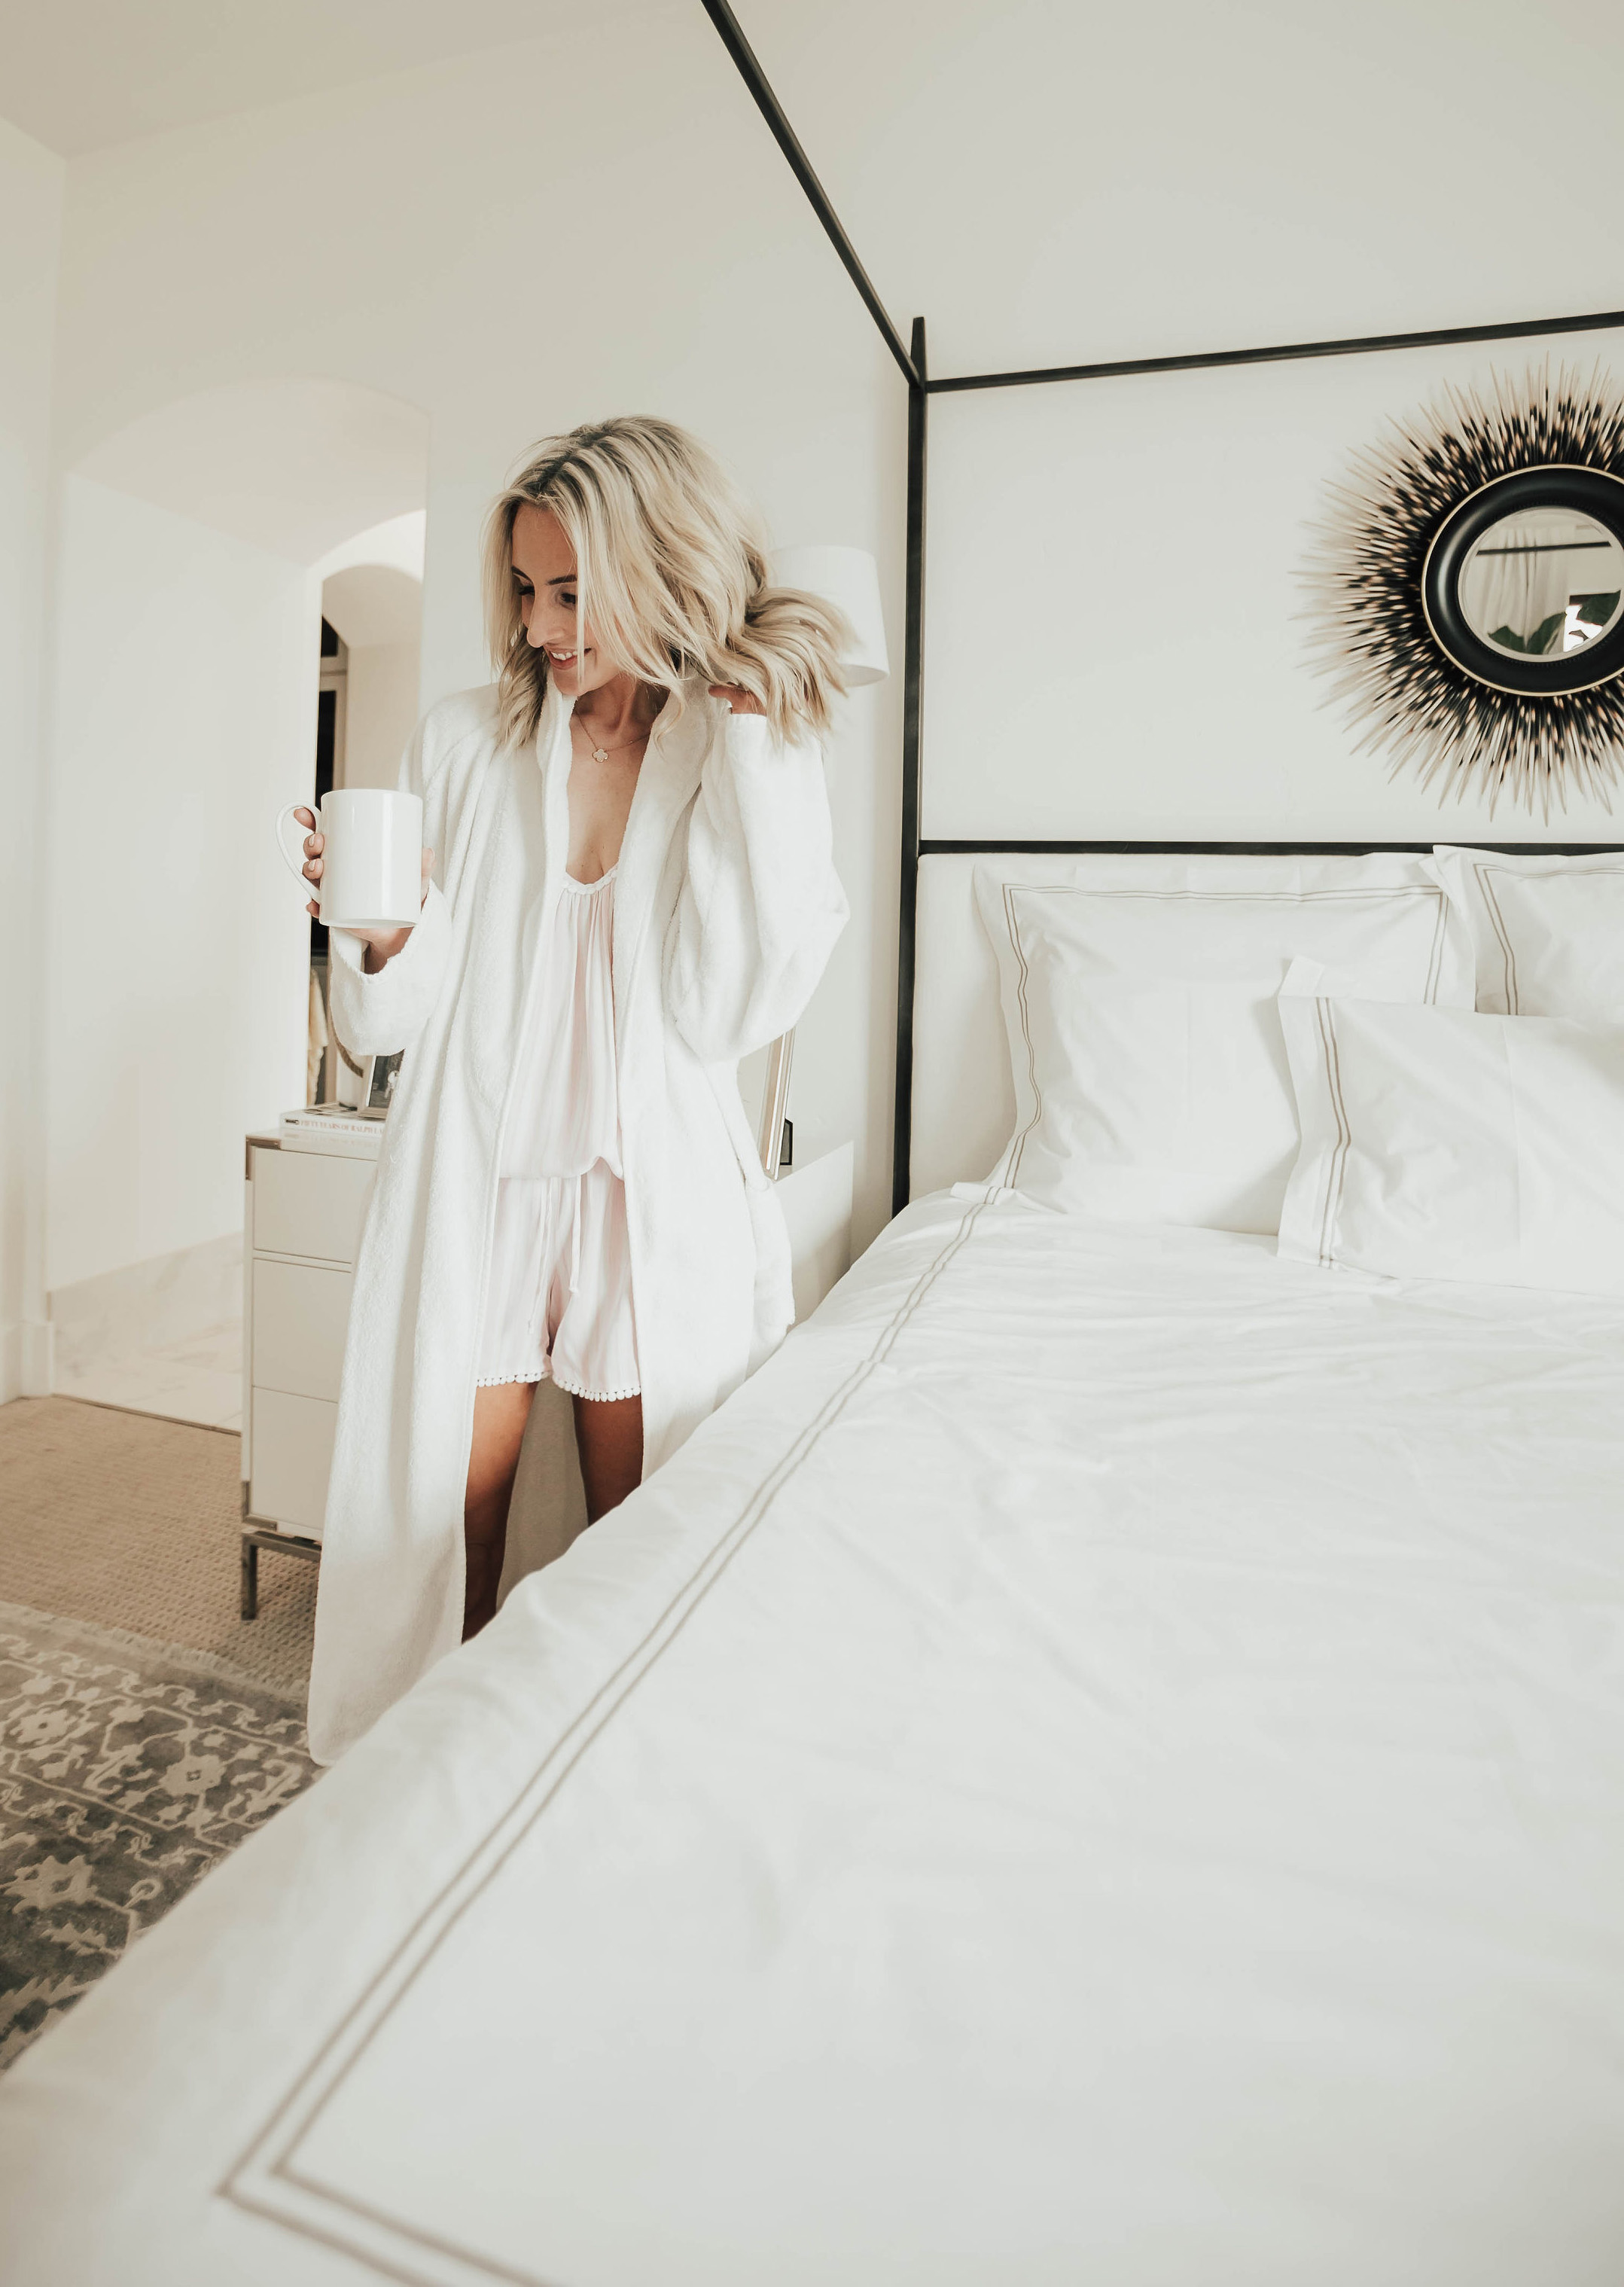 Reno Nevada blogger, Emily Farren Wieczorek of Two Peas in a Prada shares her new beautiful modern bedding from Bloomingdales!